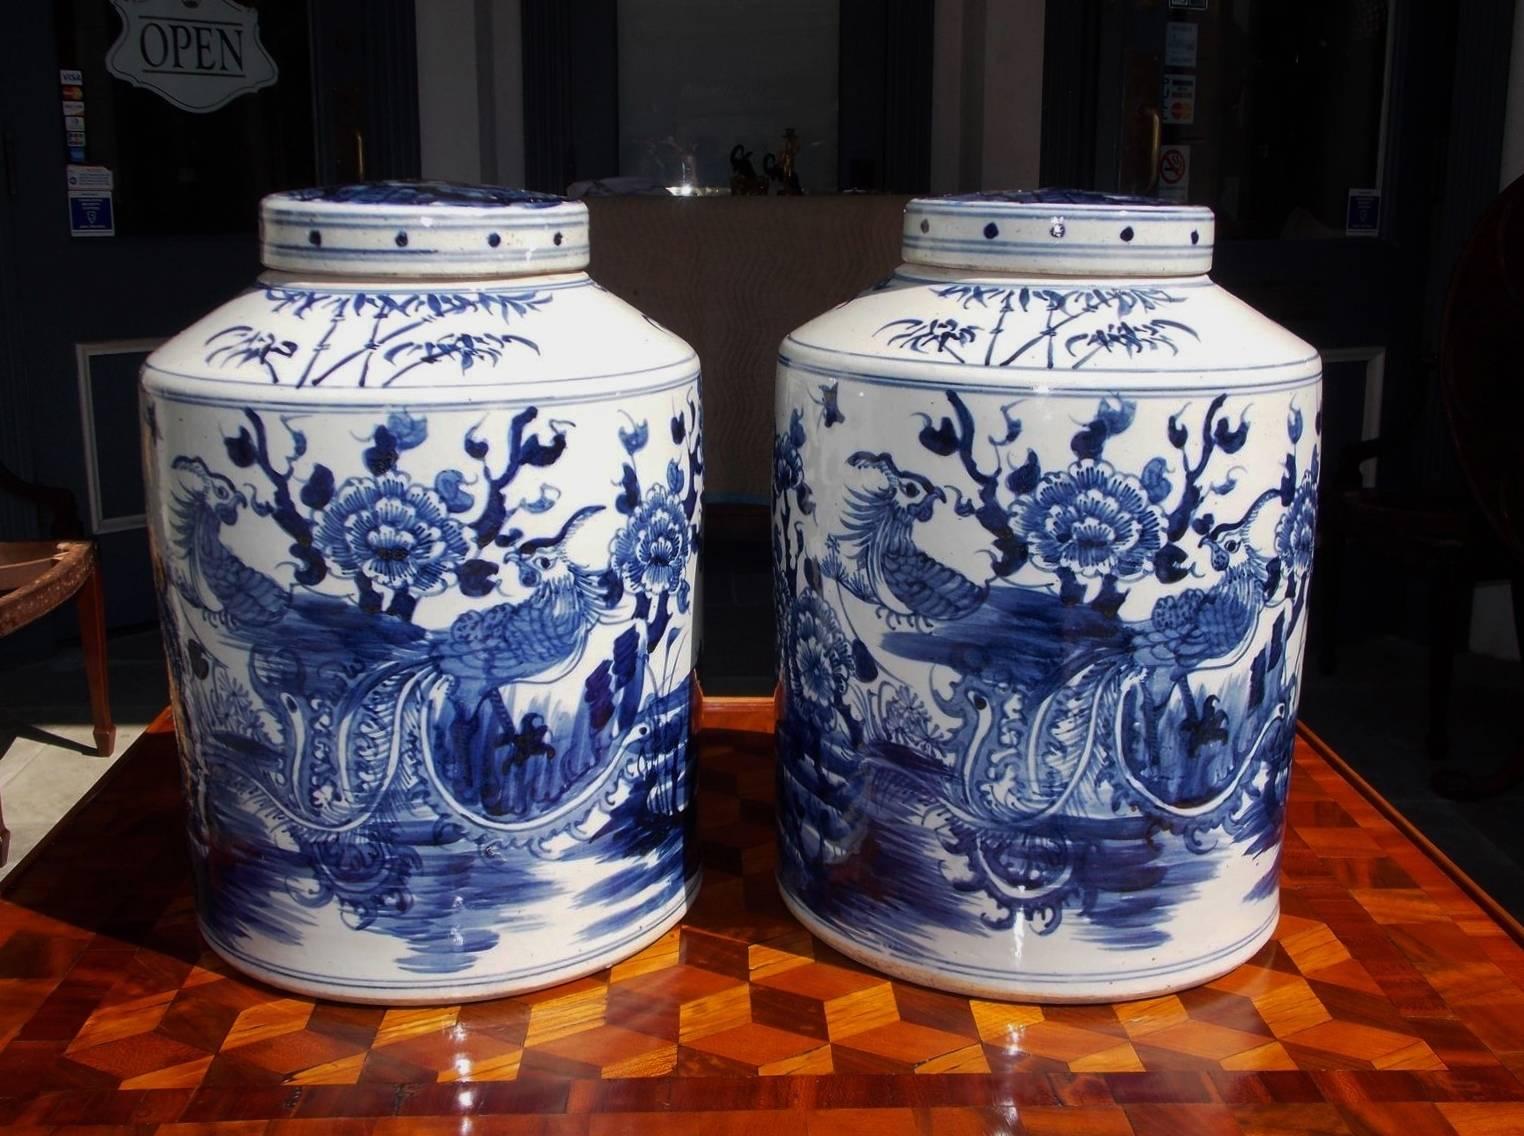 Pair of Chinese porcelain glazed blue and white temple jars with hand-painted parrots perched in trees, decorative flowers, and a running stream. Lids are removable and jars were used to store food and perishable goods, 20th century.